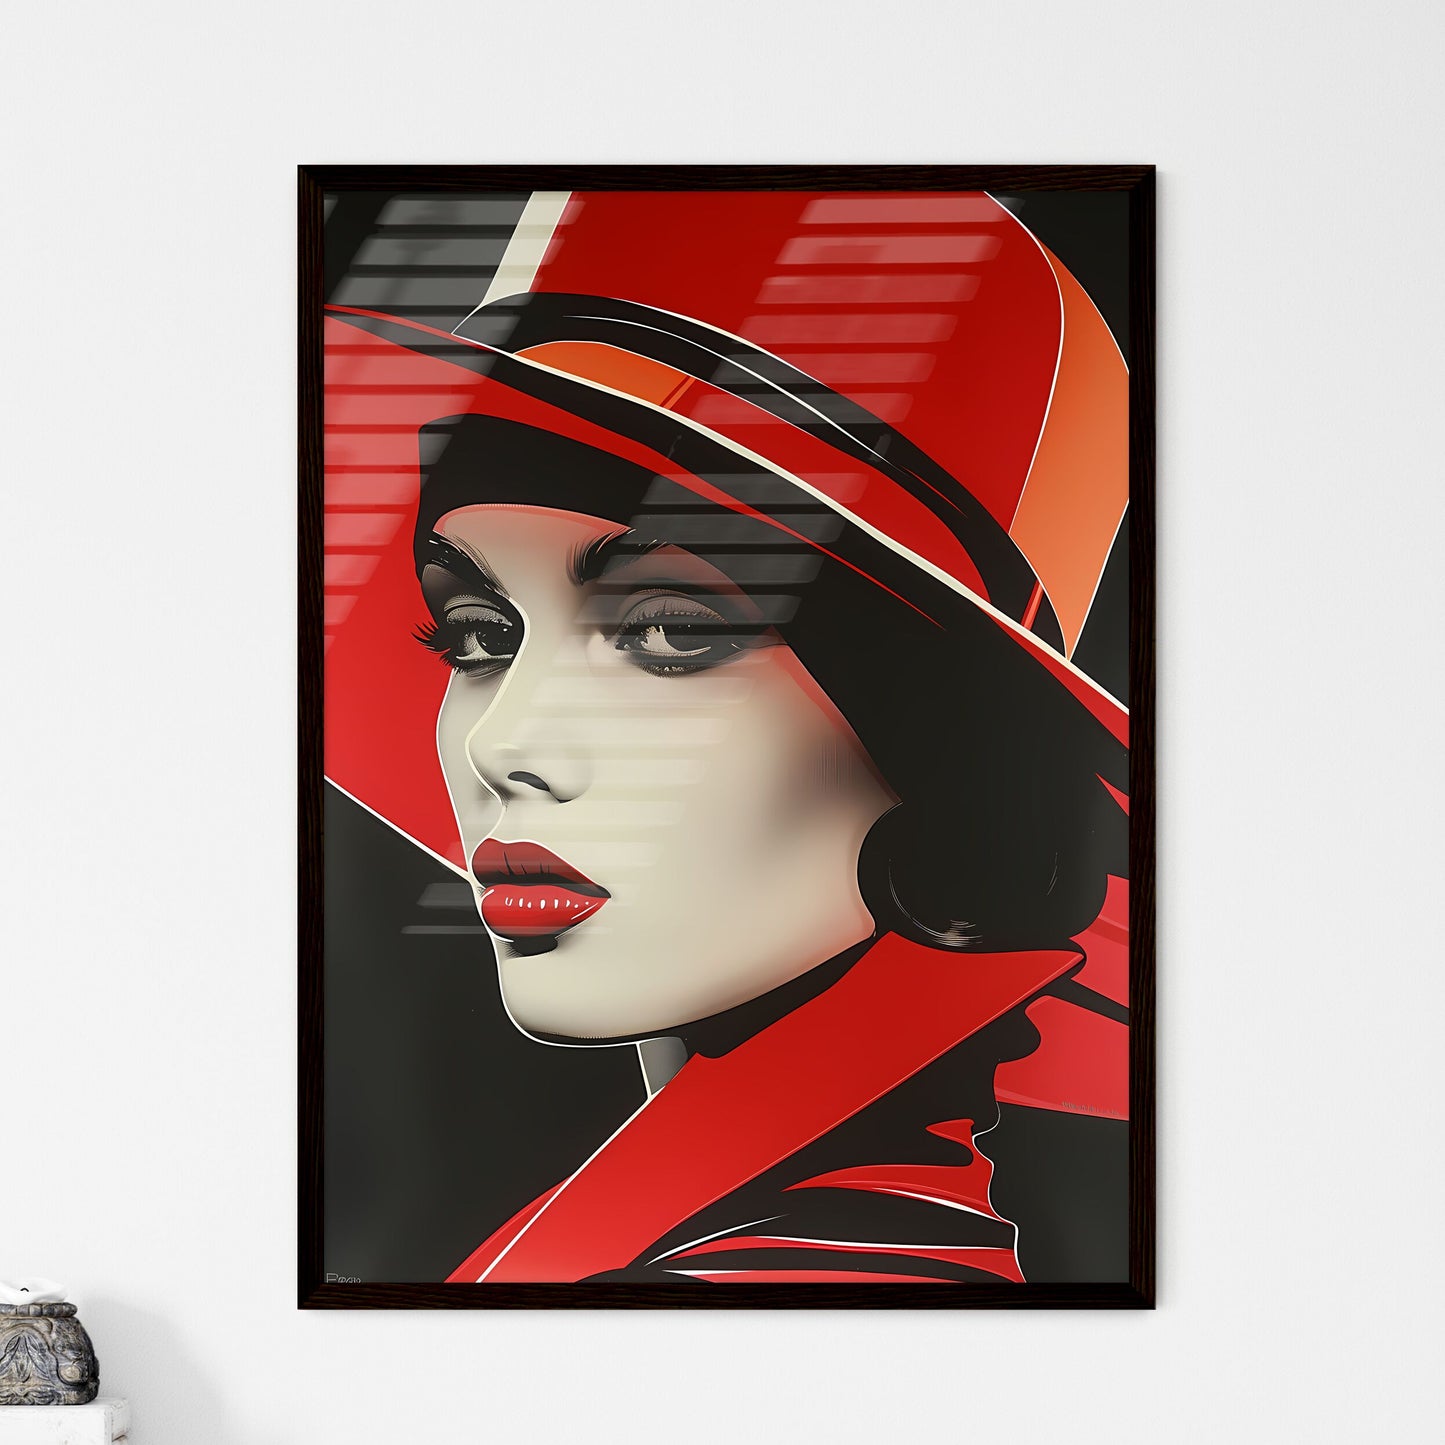 Vibrant Pop Art Silkscreen: Woman in Red Hat, Flags by Frankie Pearce - Captivating and Artistic Portrait. Default Title